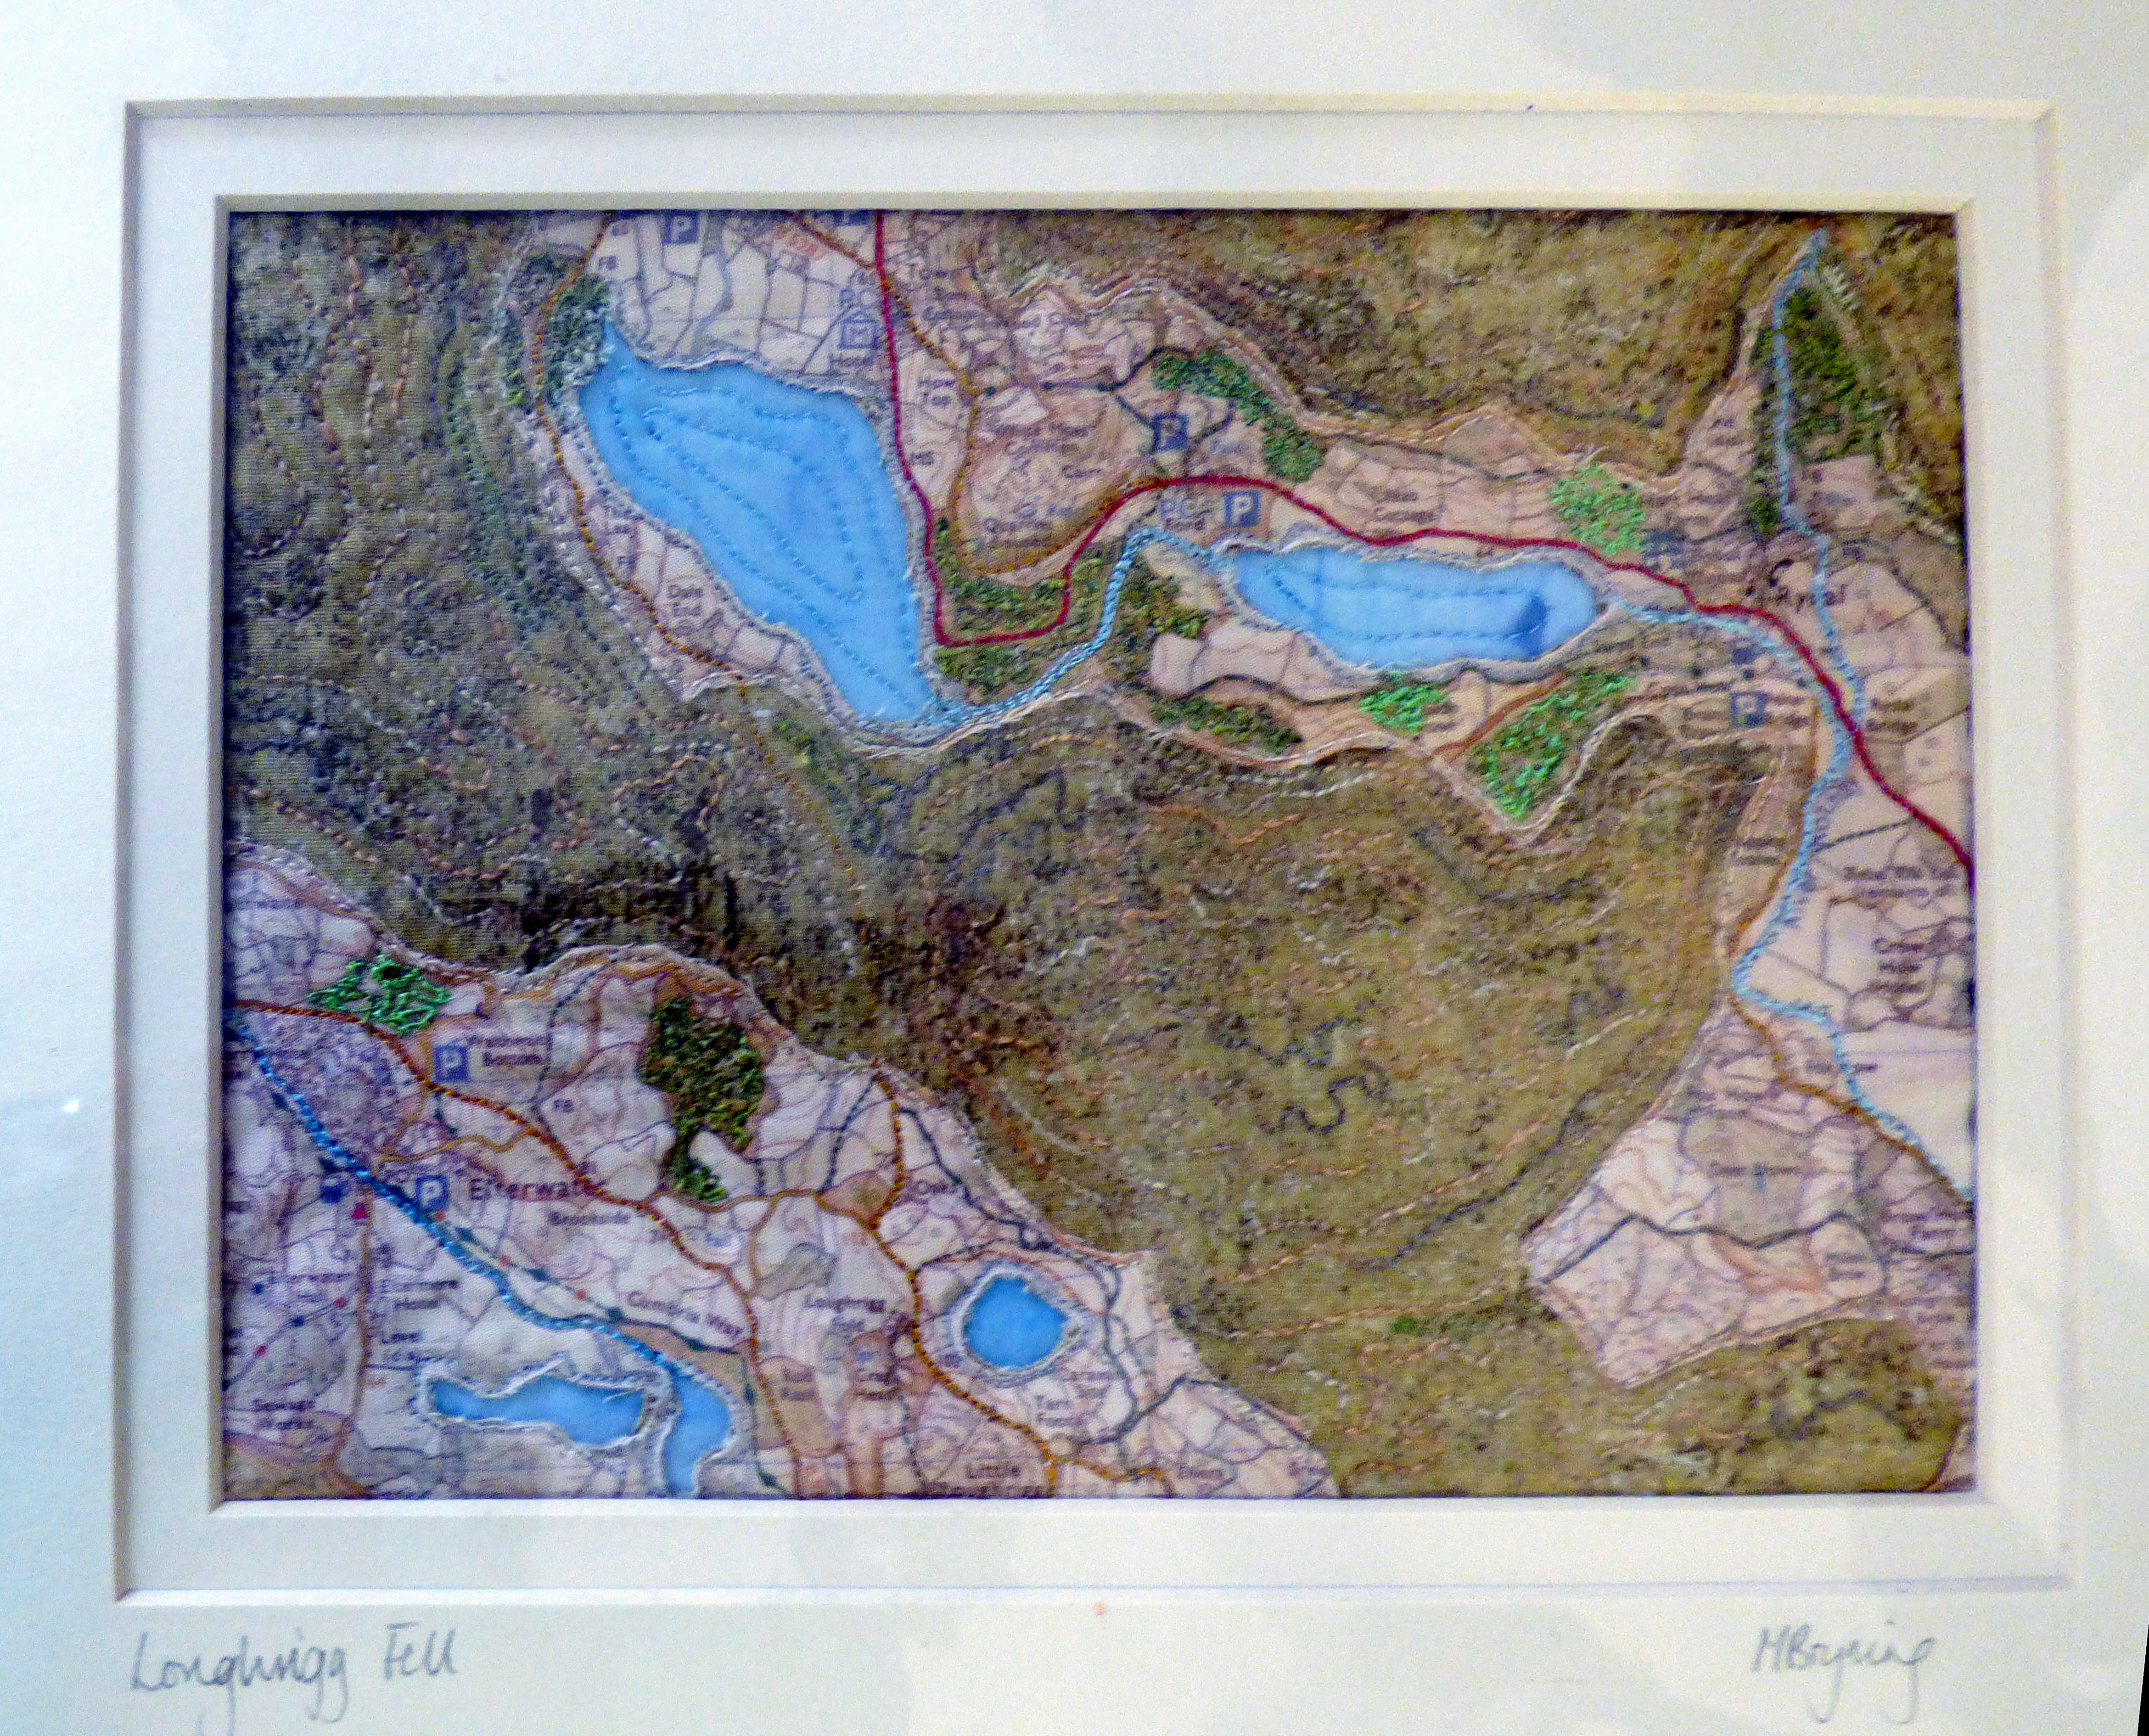 LOUGHRIGG FELL, embroidery by Mary Bryning at "Maps in Stitch" Talk by Mary Bryning, October 2023